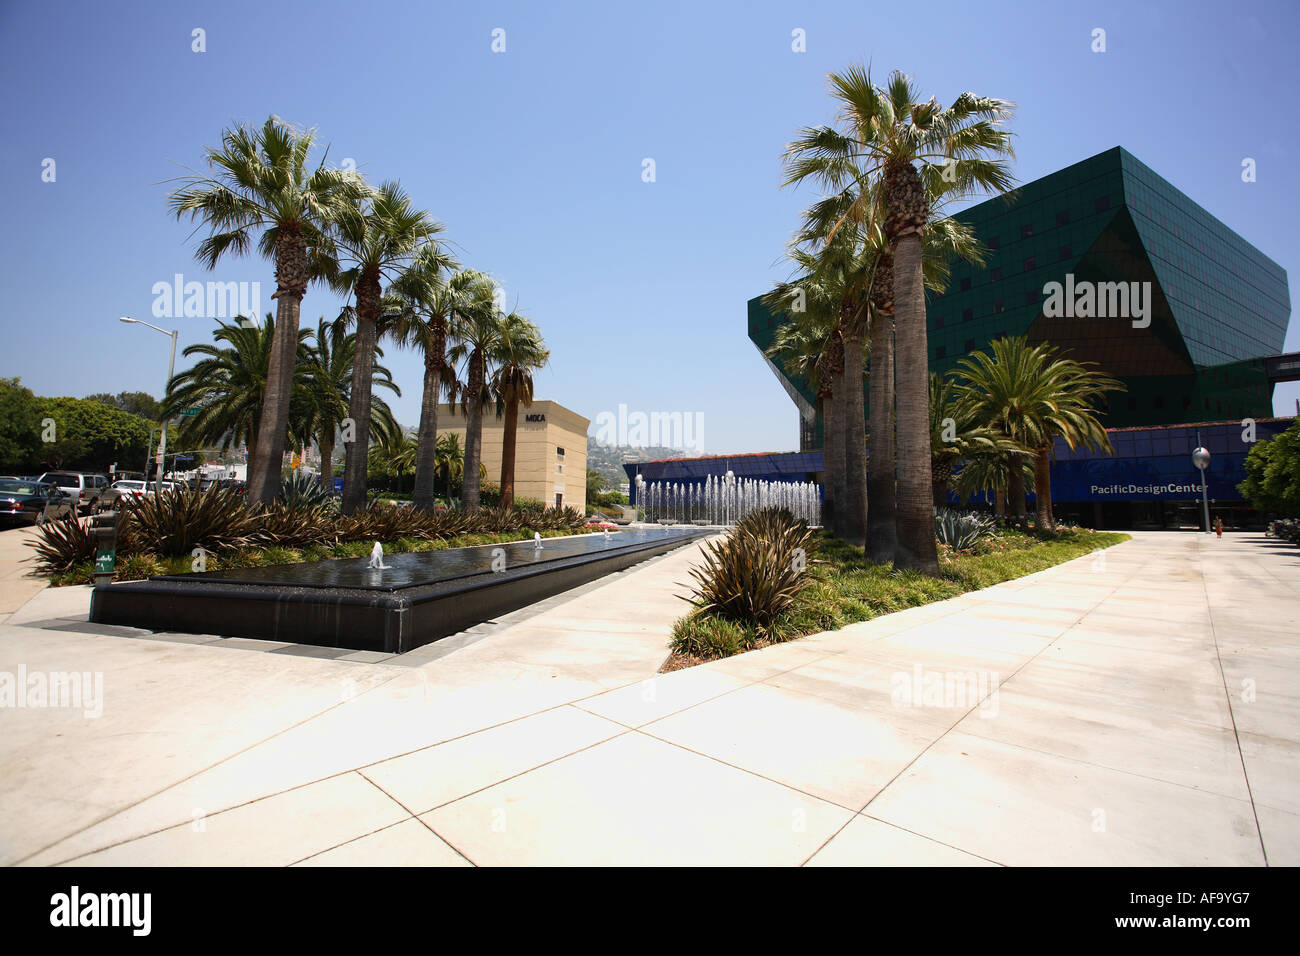 Pacific Design Center, West Hollywood, Los Angeles, California, U.S.A Stock Photo